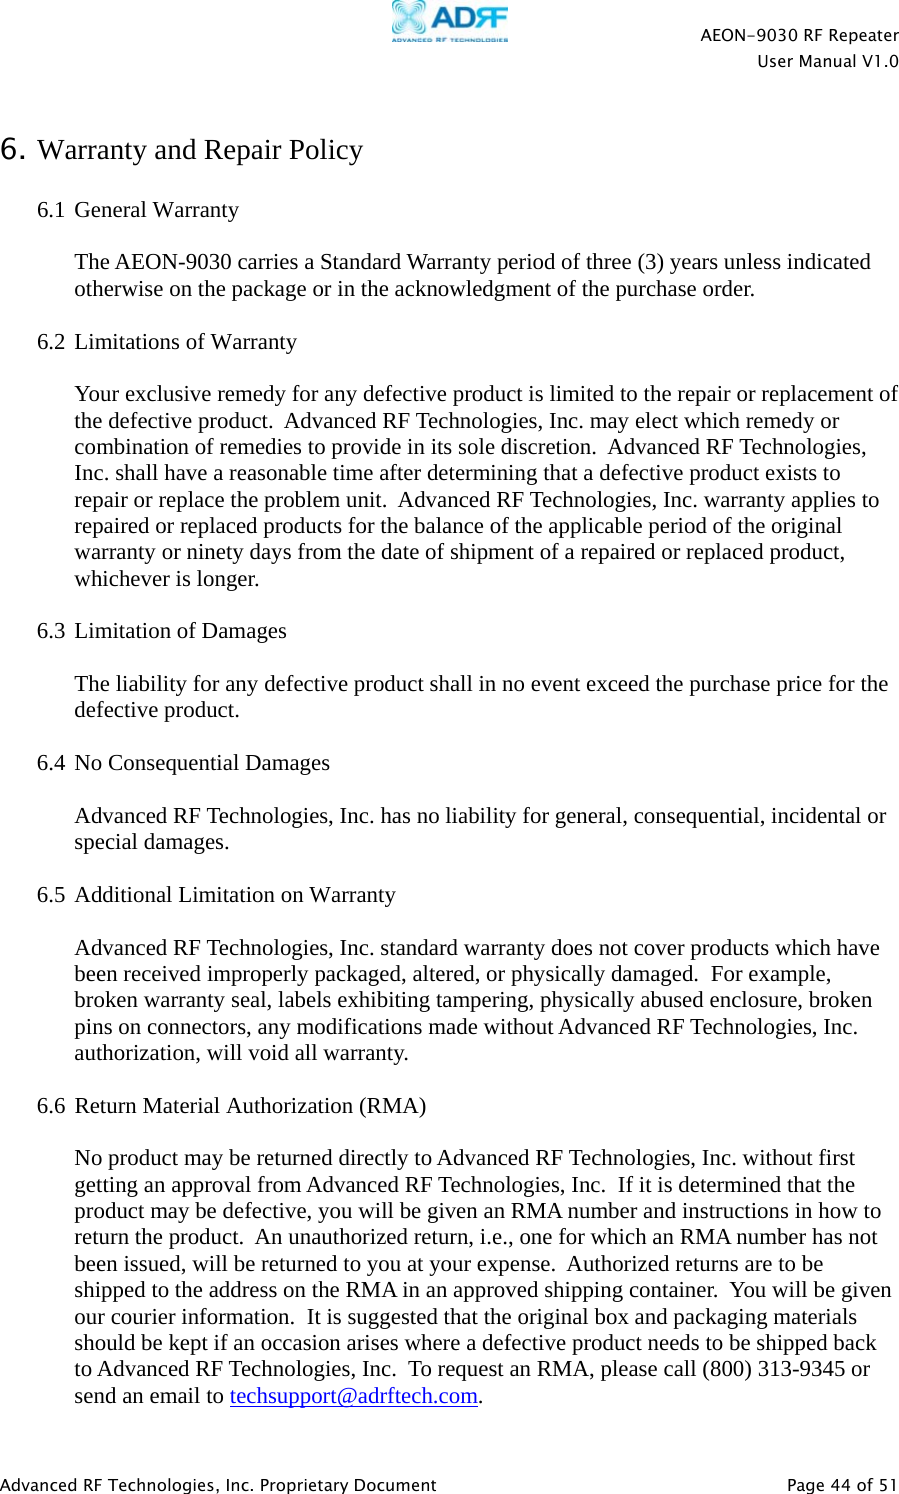   AEON-9030 RF Repeater User Manual V1.0  Advanced RF Technologies, Inc. Proprietary Document   Page 44 of 51   6. Warranty and Repair Policy  6.1 General Warranty  The AEON-9030 carries a Standard Warranty period of three (3) years unless indicated otherwise on the package or in the acknowledgment of the purchase order.  6.2 Limitations of Warranty  Your exclusive remedy for any defective product is limited to the repair or replacement of the defective product.  Advanced RF Technologies, Inc. may elect which remedy or combination of remedies to provide in its sole discretion.  Advanced RF Technologies, Inc. shall have a reasonable time after determining that a defective product exists to repair or replace the problem unit.  Advanced RF Technologies, Inc. warranty applies to repaired or replaced products for the balance of the applicable period of the original warranty or ninety days from the date of shipment of a repaired or replaced product, whichever is longer.   6.3 Limitation of Damages  The liability for any defective product shall in no event exceed the purchase price for the defective product.    6.4 No Consequential Damages  Advanced RF Technologies, Inc. has no liability for general, consequential, incidental or special damages.    6.5 Additional Limitation on Warranty  Advanced RF Technologies, Inc. standard warranty does not cover products which have been received improperly packaged, altered, or physically damaged.  For example, broken warranty seal, labels exhibiting tampering, physically abused enclosure, broken pins on connectors, any modifications made without Advanced RF Technologies, Inc. authorization, will void all warranty.    6.6 Return Material Authorization (RMA)  No product may be returned directly to Advanced RF Technologies, Inc. without first getting an approval from Advanced RF Technologies, Inc.  If it is determined that the product may be defective, you will be given an RMA number and instructions in how to return the product.  An unauthorized return, i.e., one for which an RMA number has not been issued, will be returned to you at your expense.  Authorized returns are to be shipped to the address on the RMA in an approved shipping container.  You will be given our courier information.  It is suggested that the original box and packaging materials should be kept if an occasion arises where a defective product needs to be shipped back to Advanced RF Technologies, Inc.  To request an RMA, please call (800) 313-9345 or send an email to techsupport@adrftech.com.  